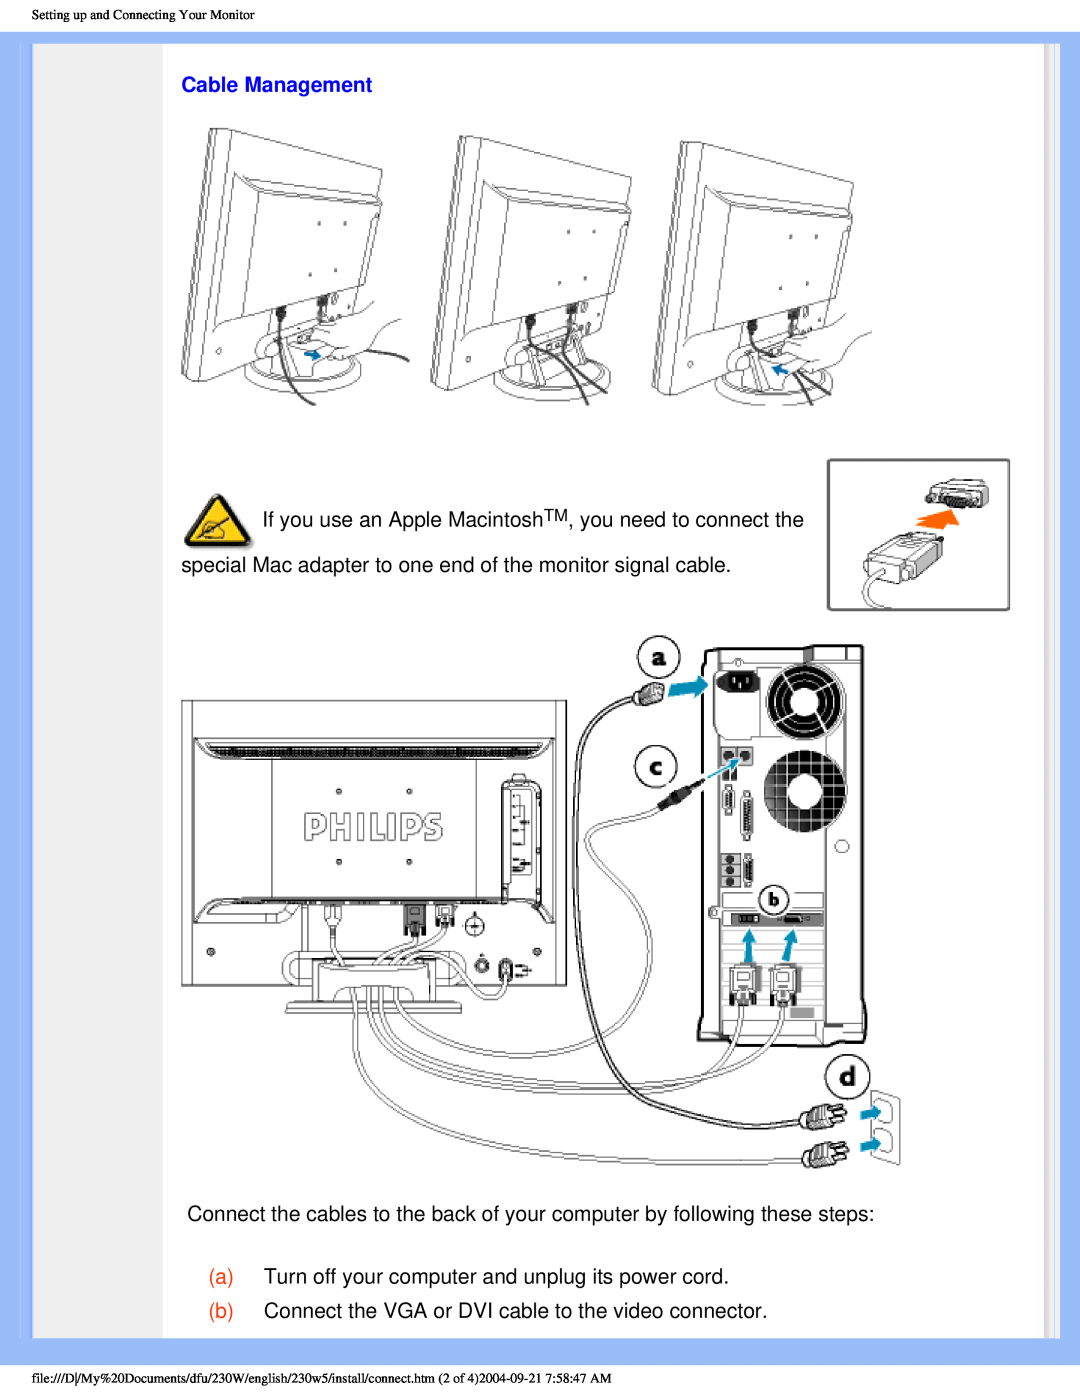 Philips 230w5 user manual Cable Management 